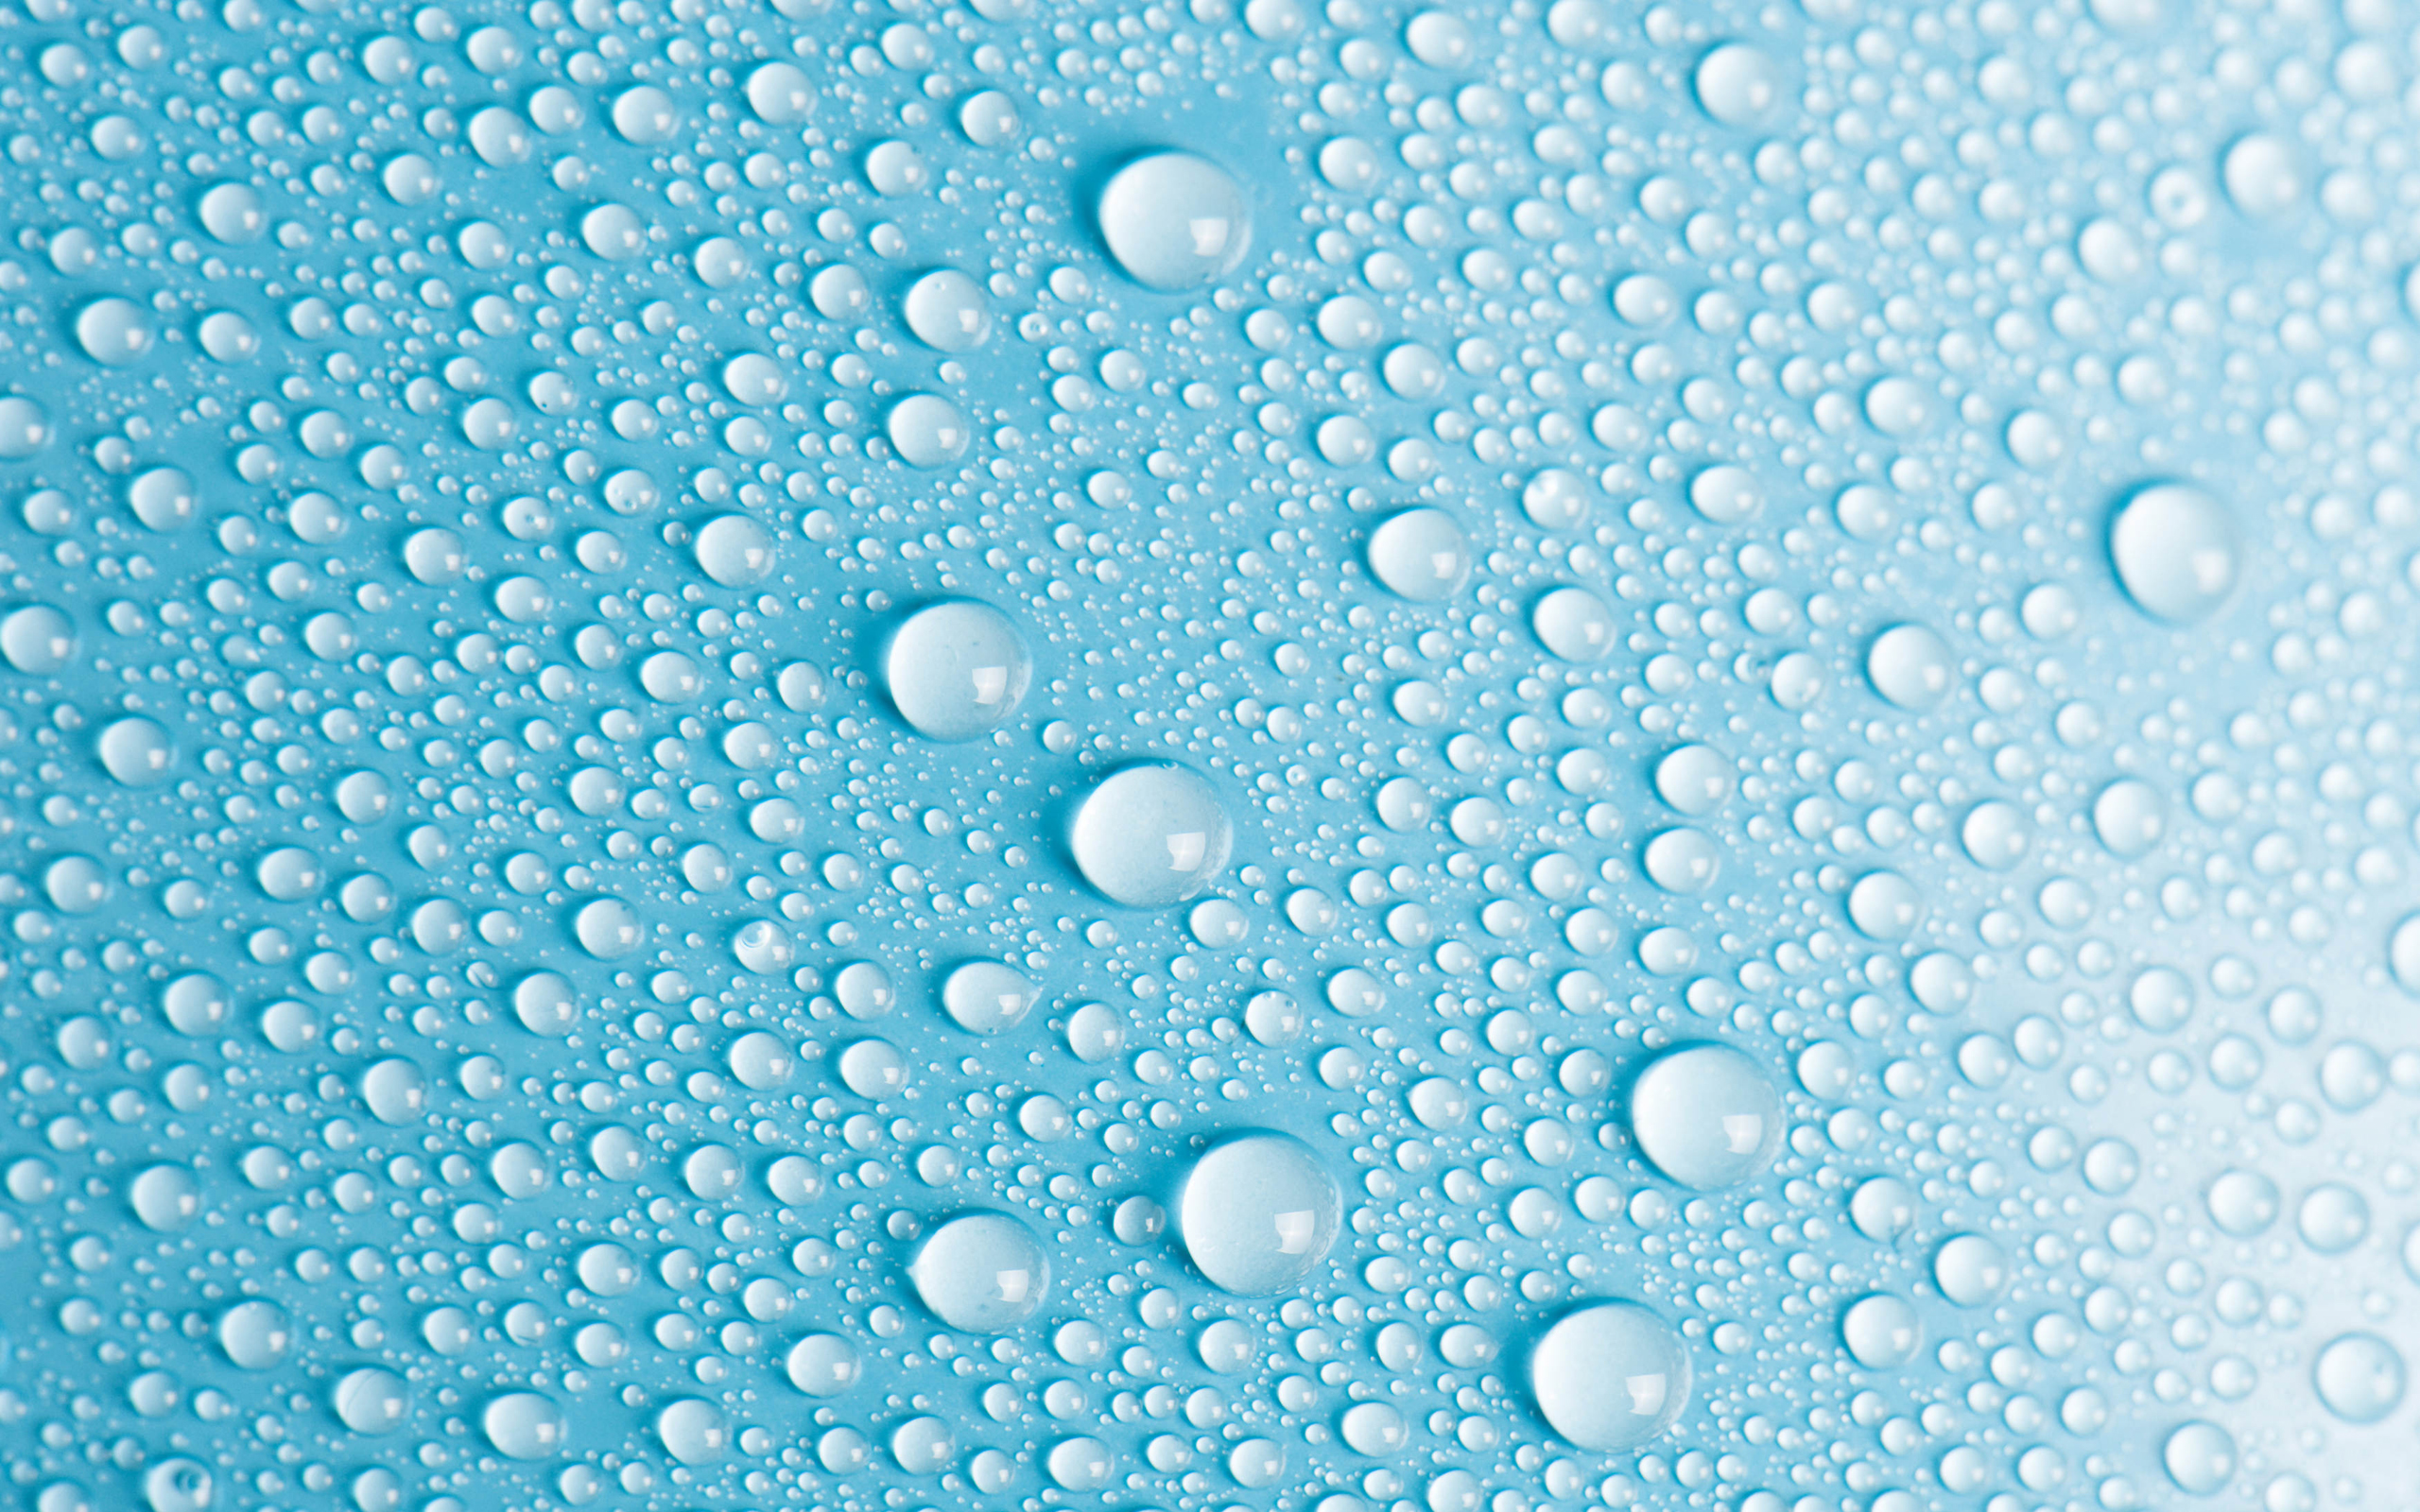 hd Wallpapers Water Droplets images